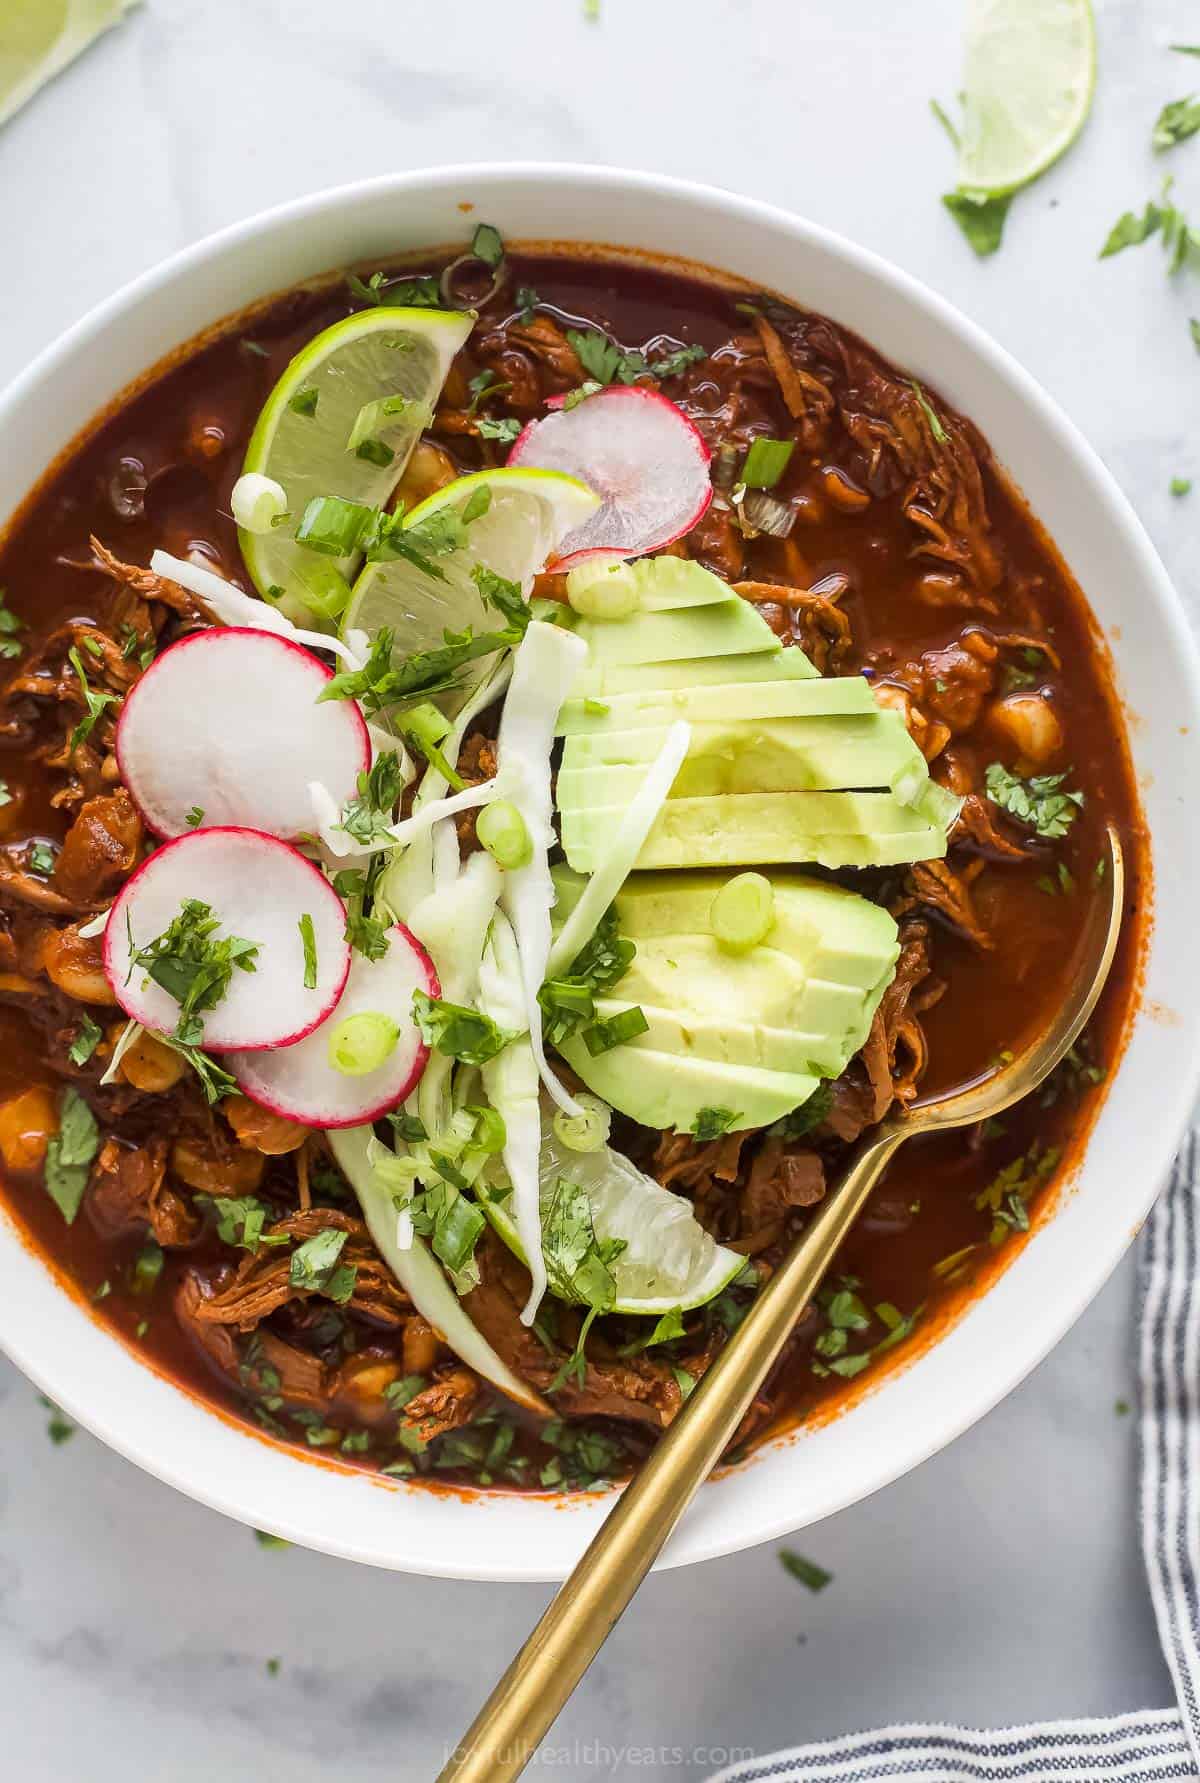 a bowl of red sauce based chicken stew garnished with radishes, lime wedges, cilantro, and avocado slices